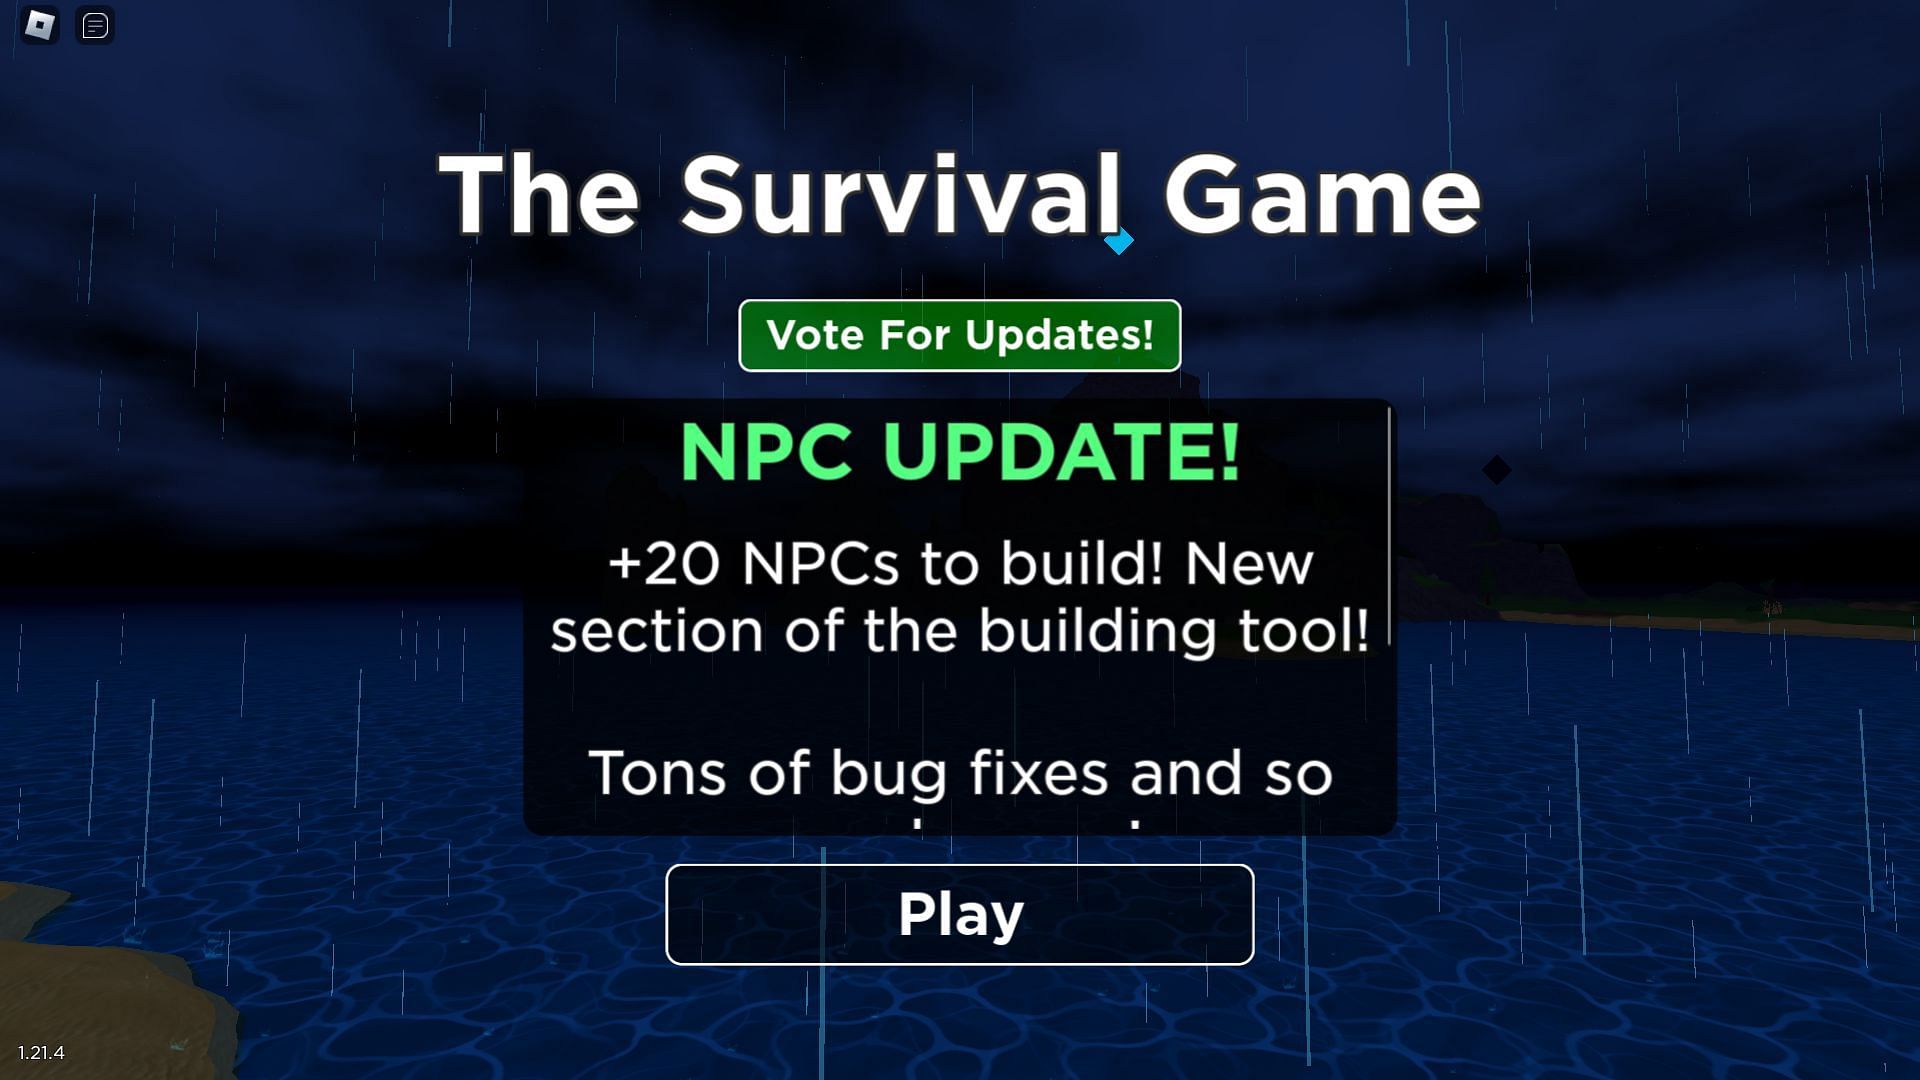 Title screen in The Survival Game (Image via Roblox)